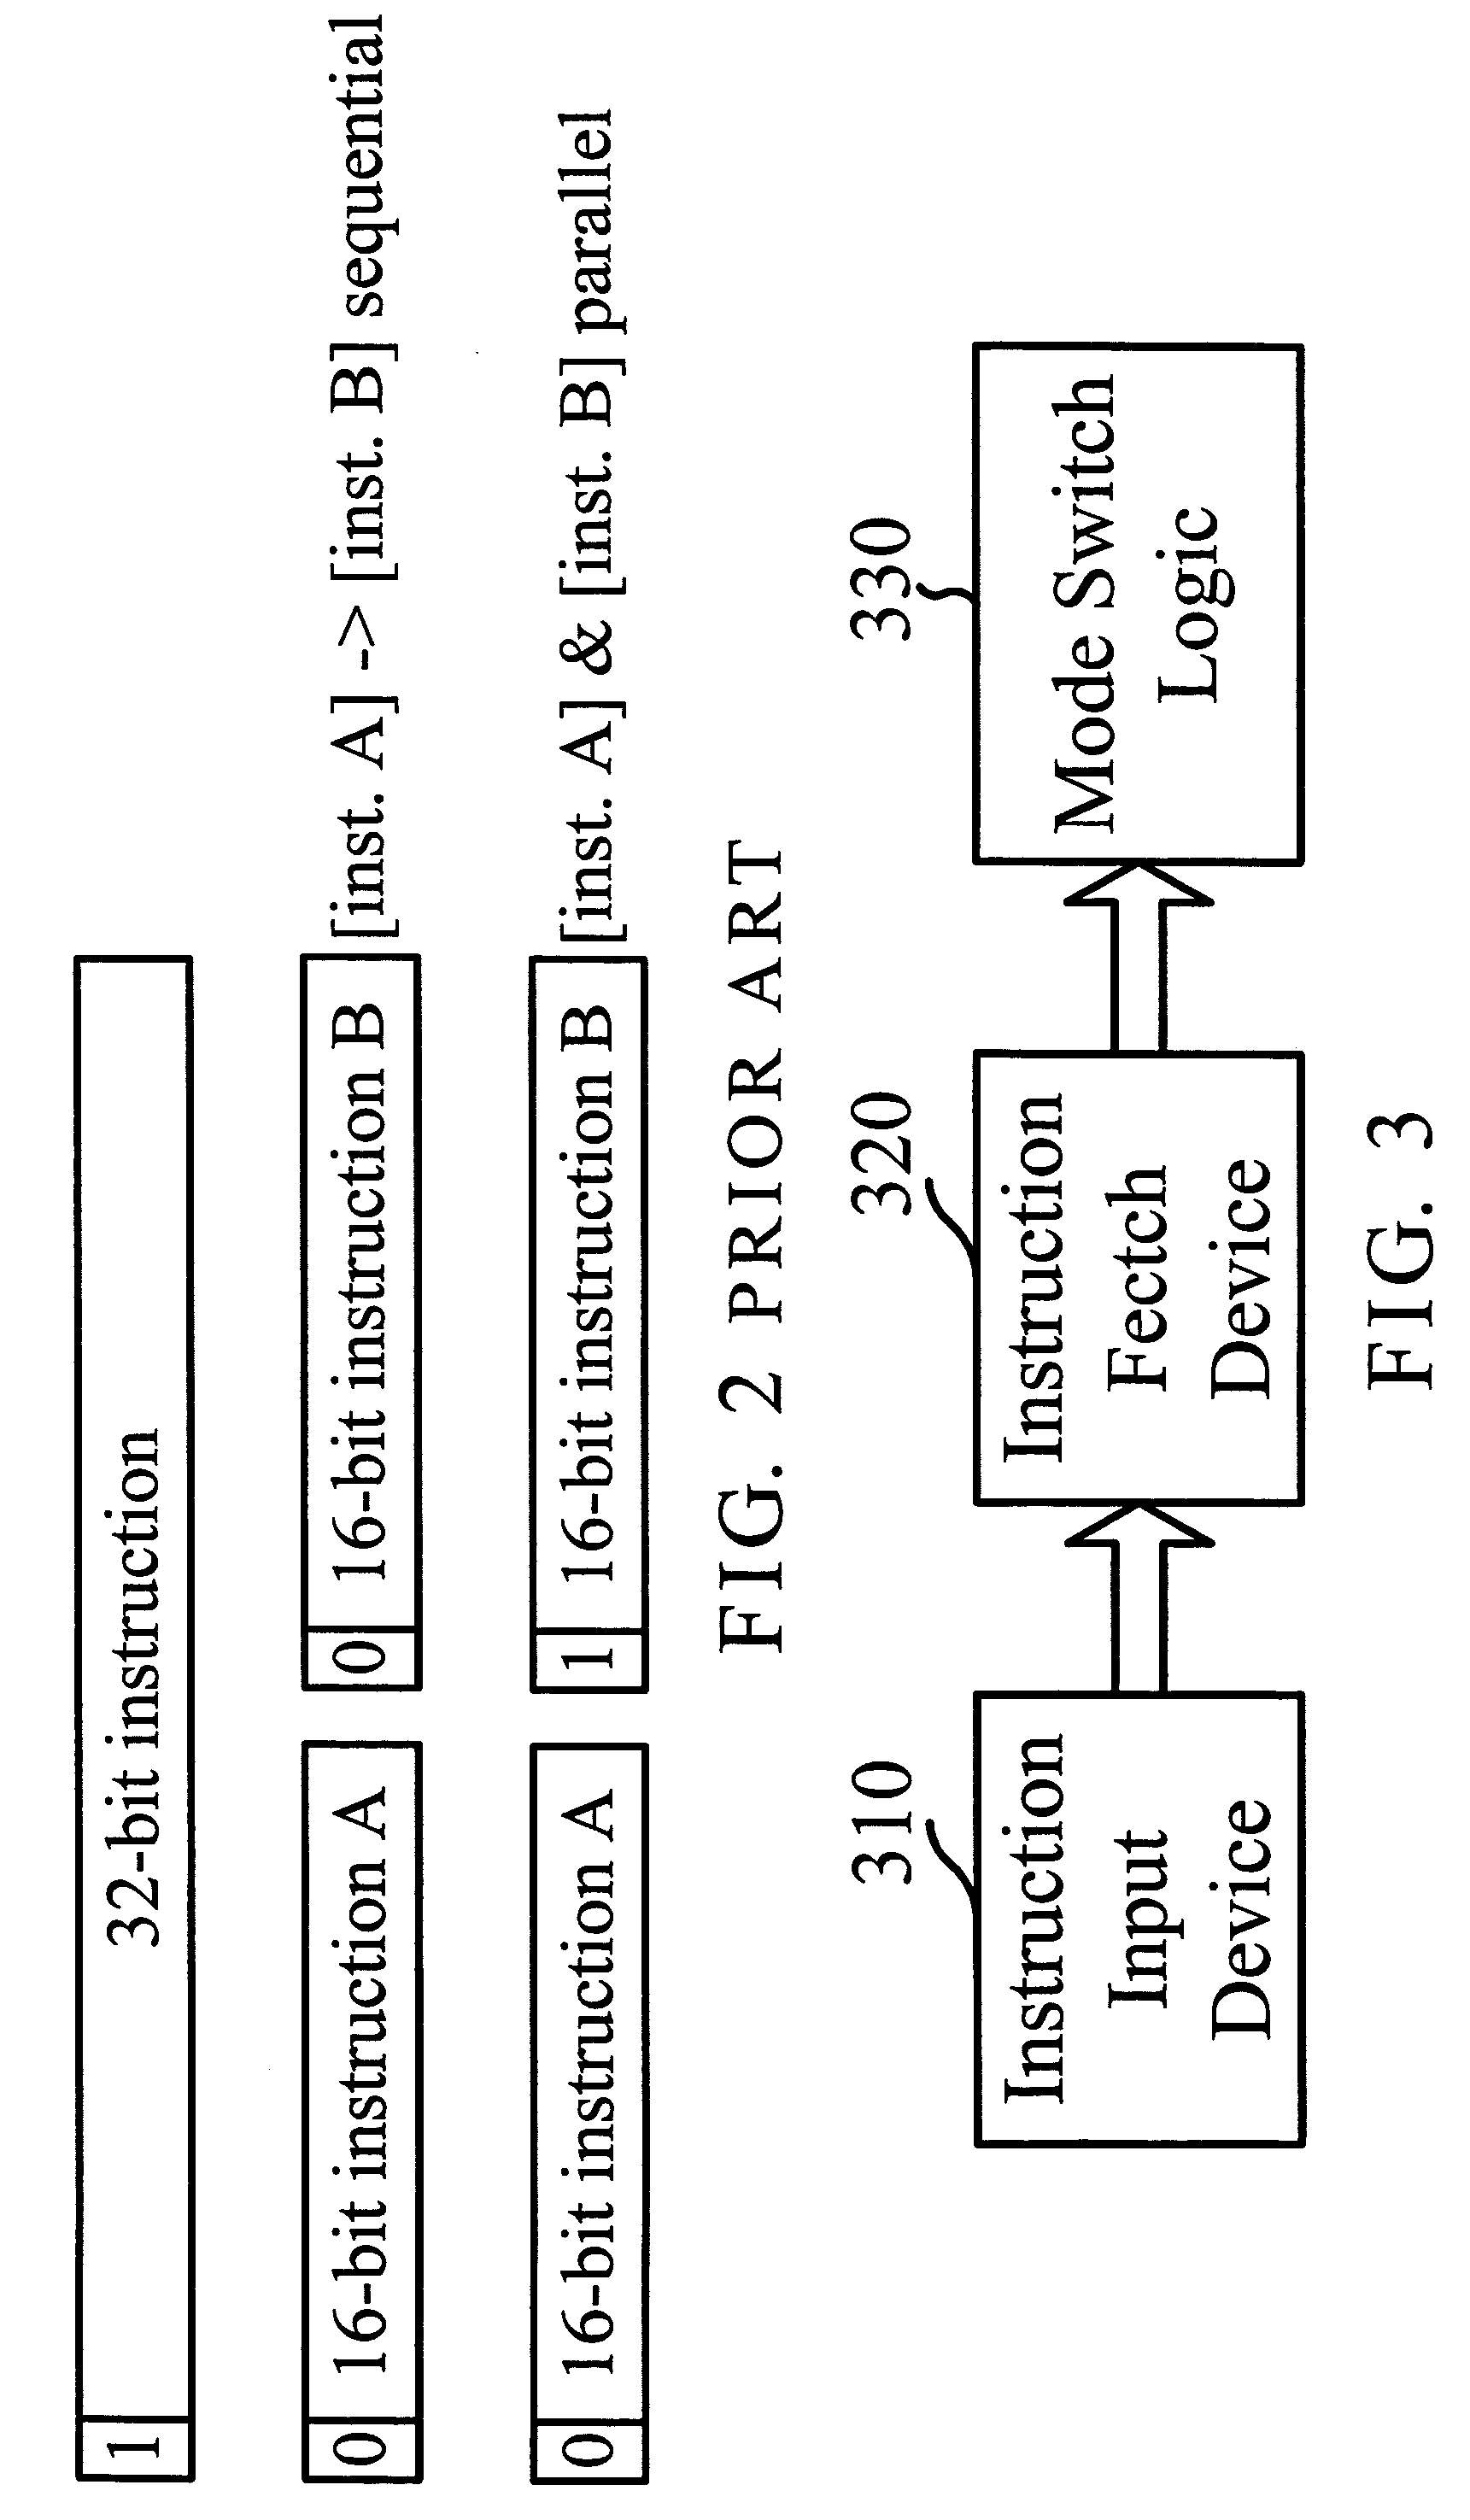 Processor and method of automatic instruction mode switching between n-bit and 2n-bit instructions by using parity check